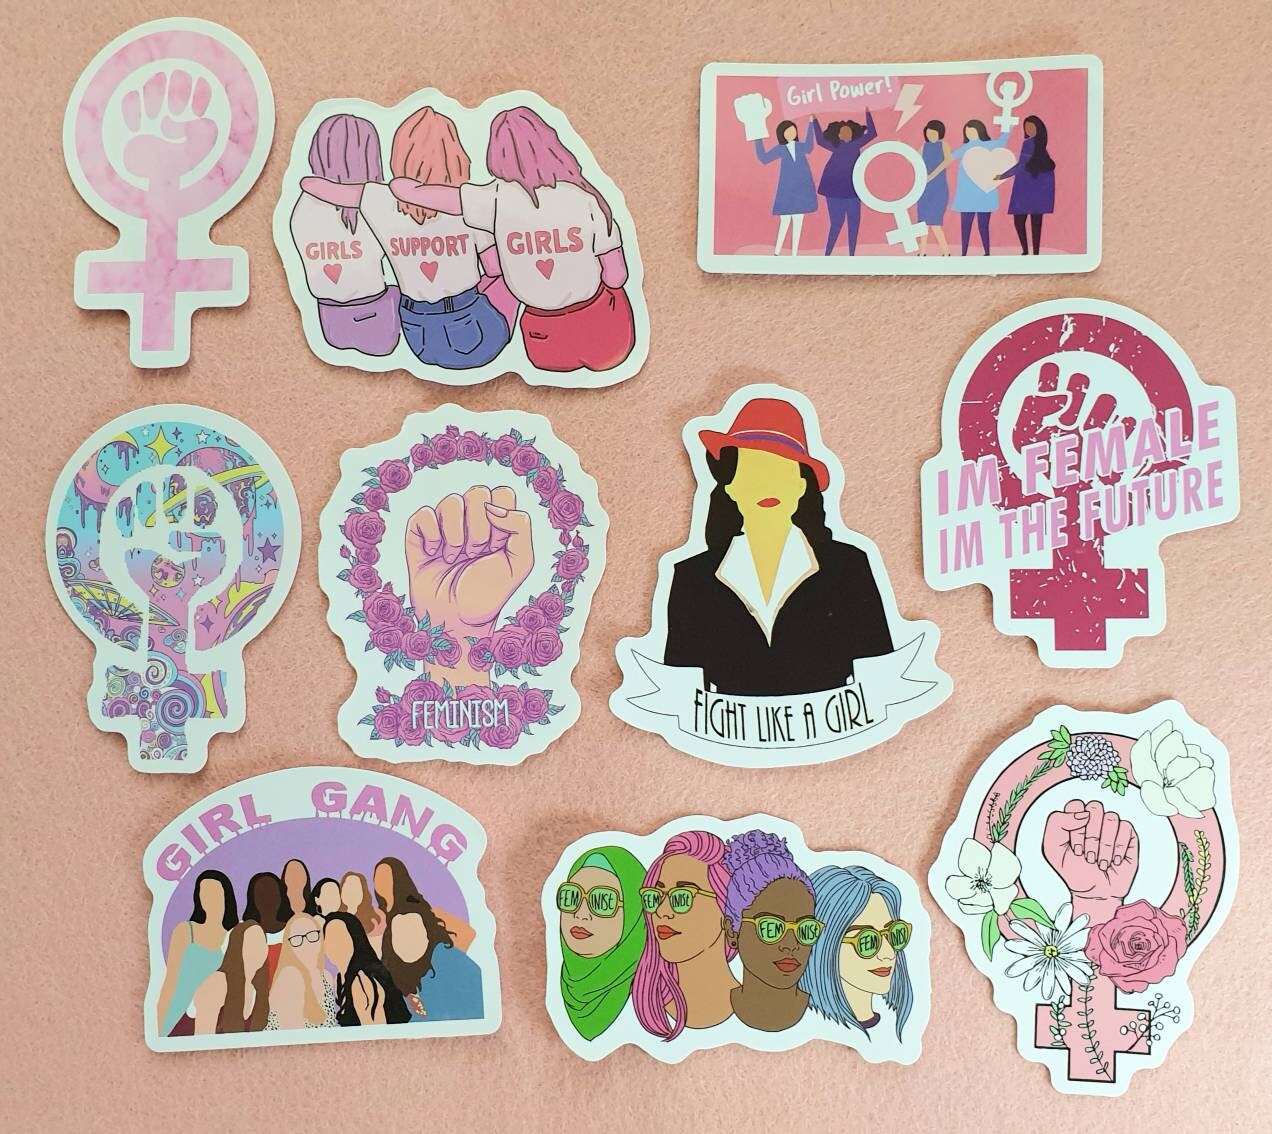 100 Pcs Stickers People Stickers for Journaling Aesthetic Girl